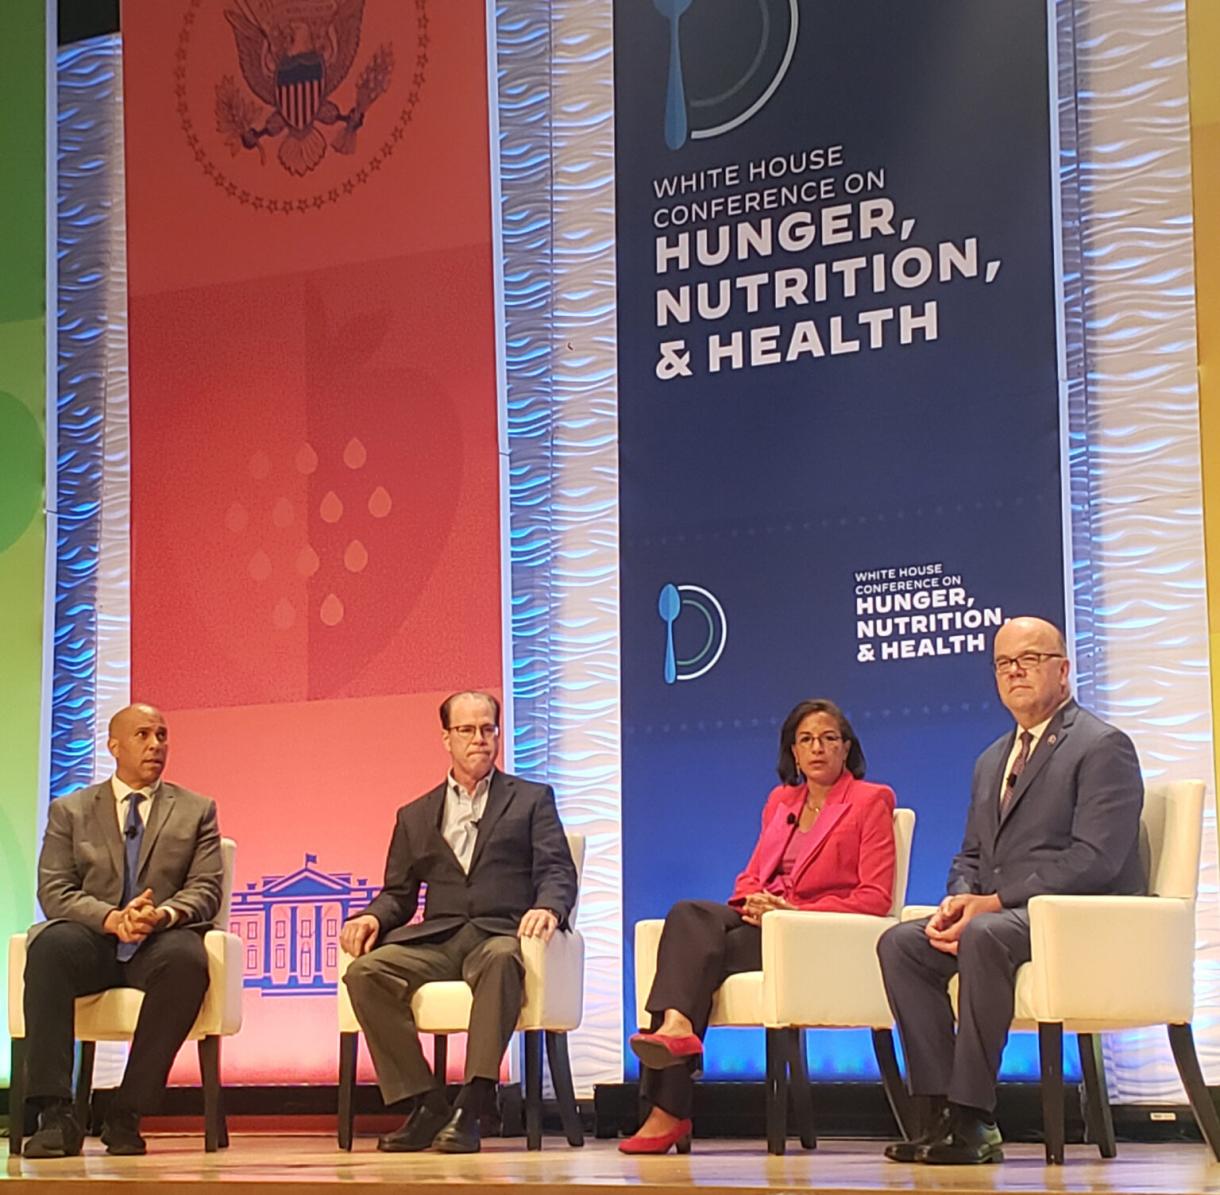 panelists at White House hunger, nutrition, and health conference